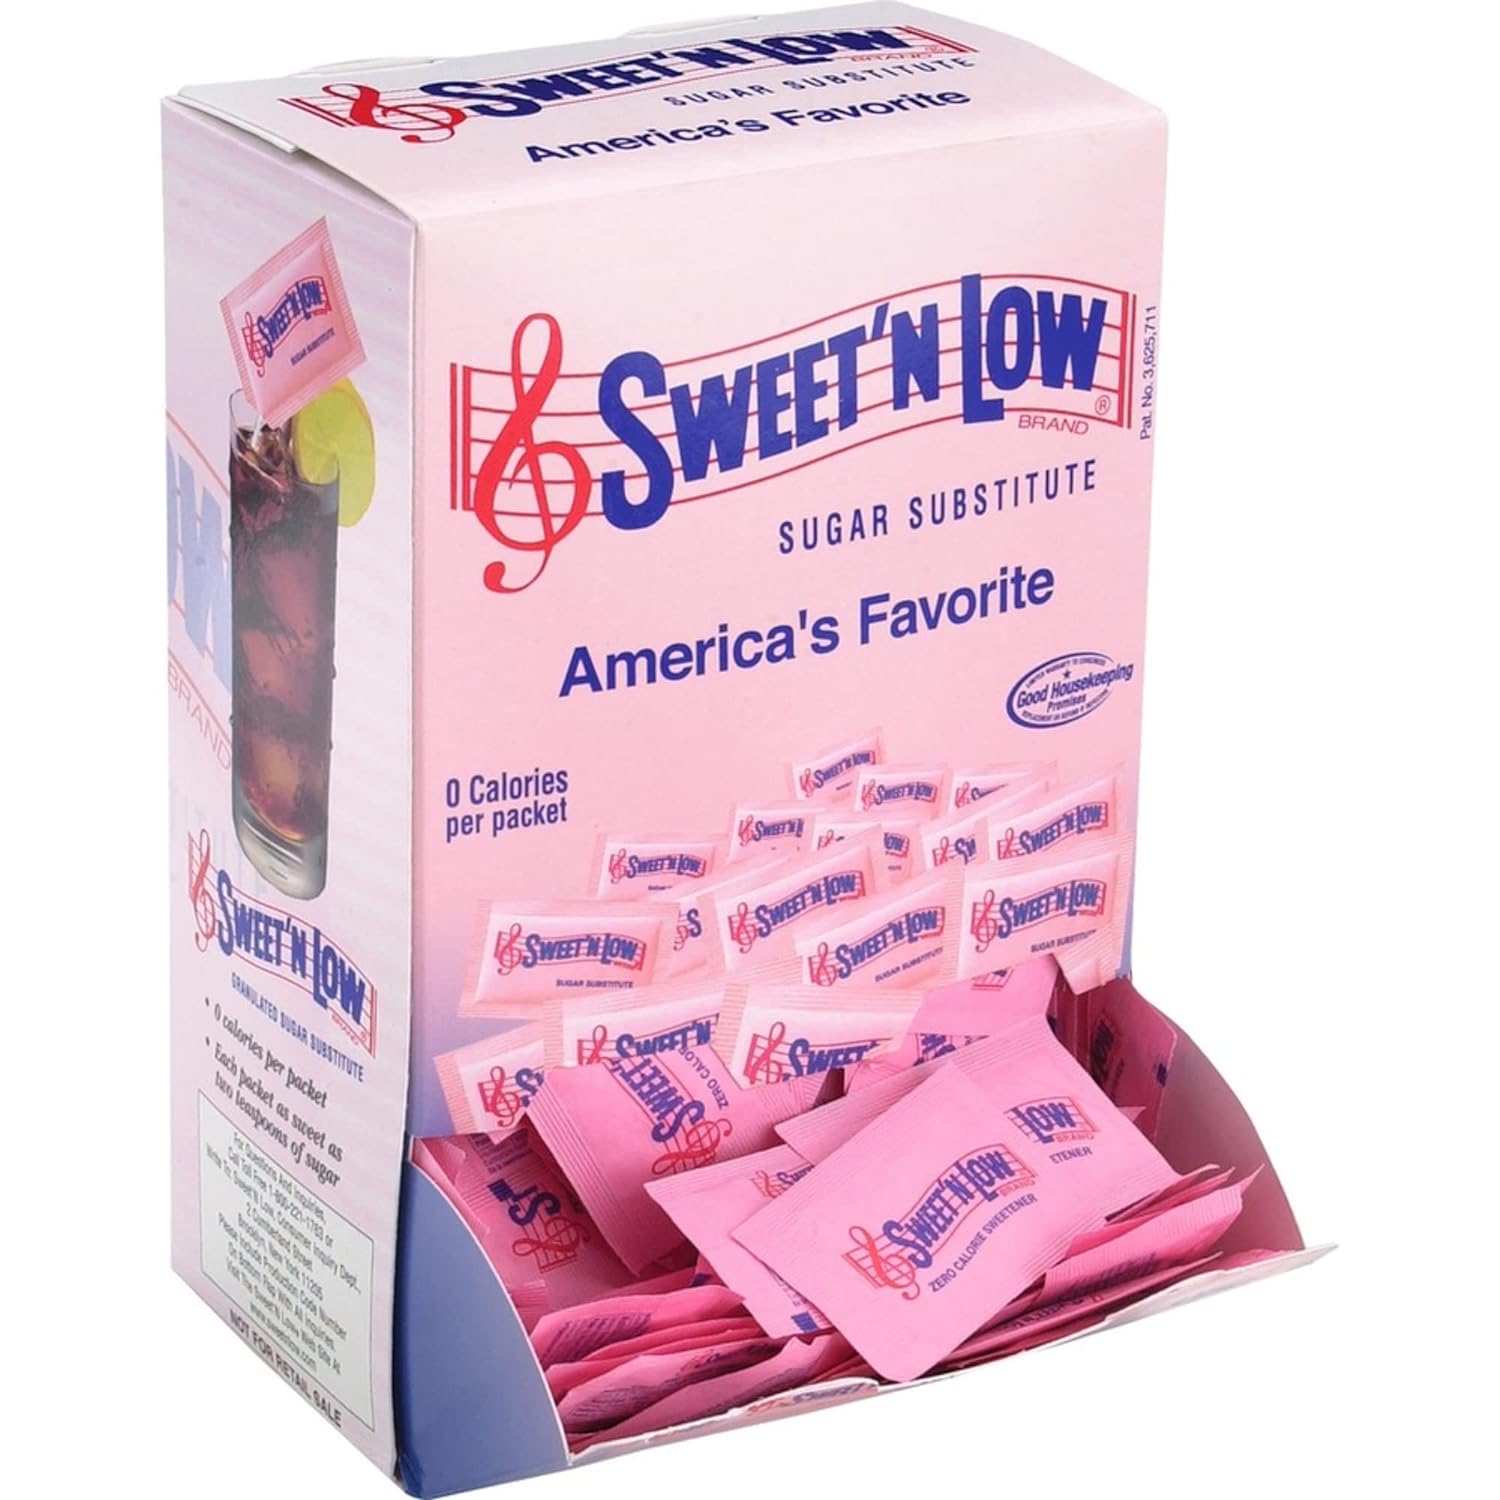  Sweetener Packets, Sweet'N Low, Box Of 400 Packets : Grocer